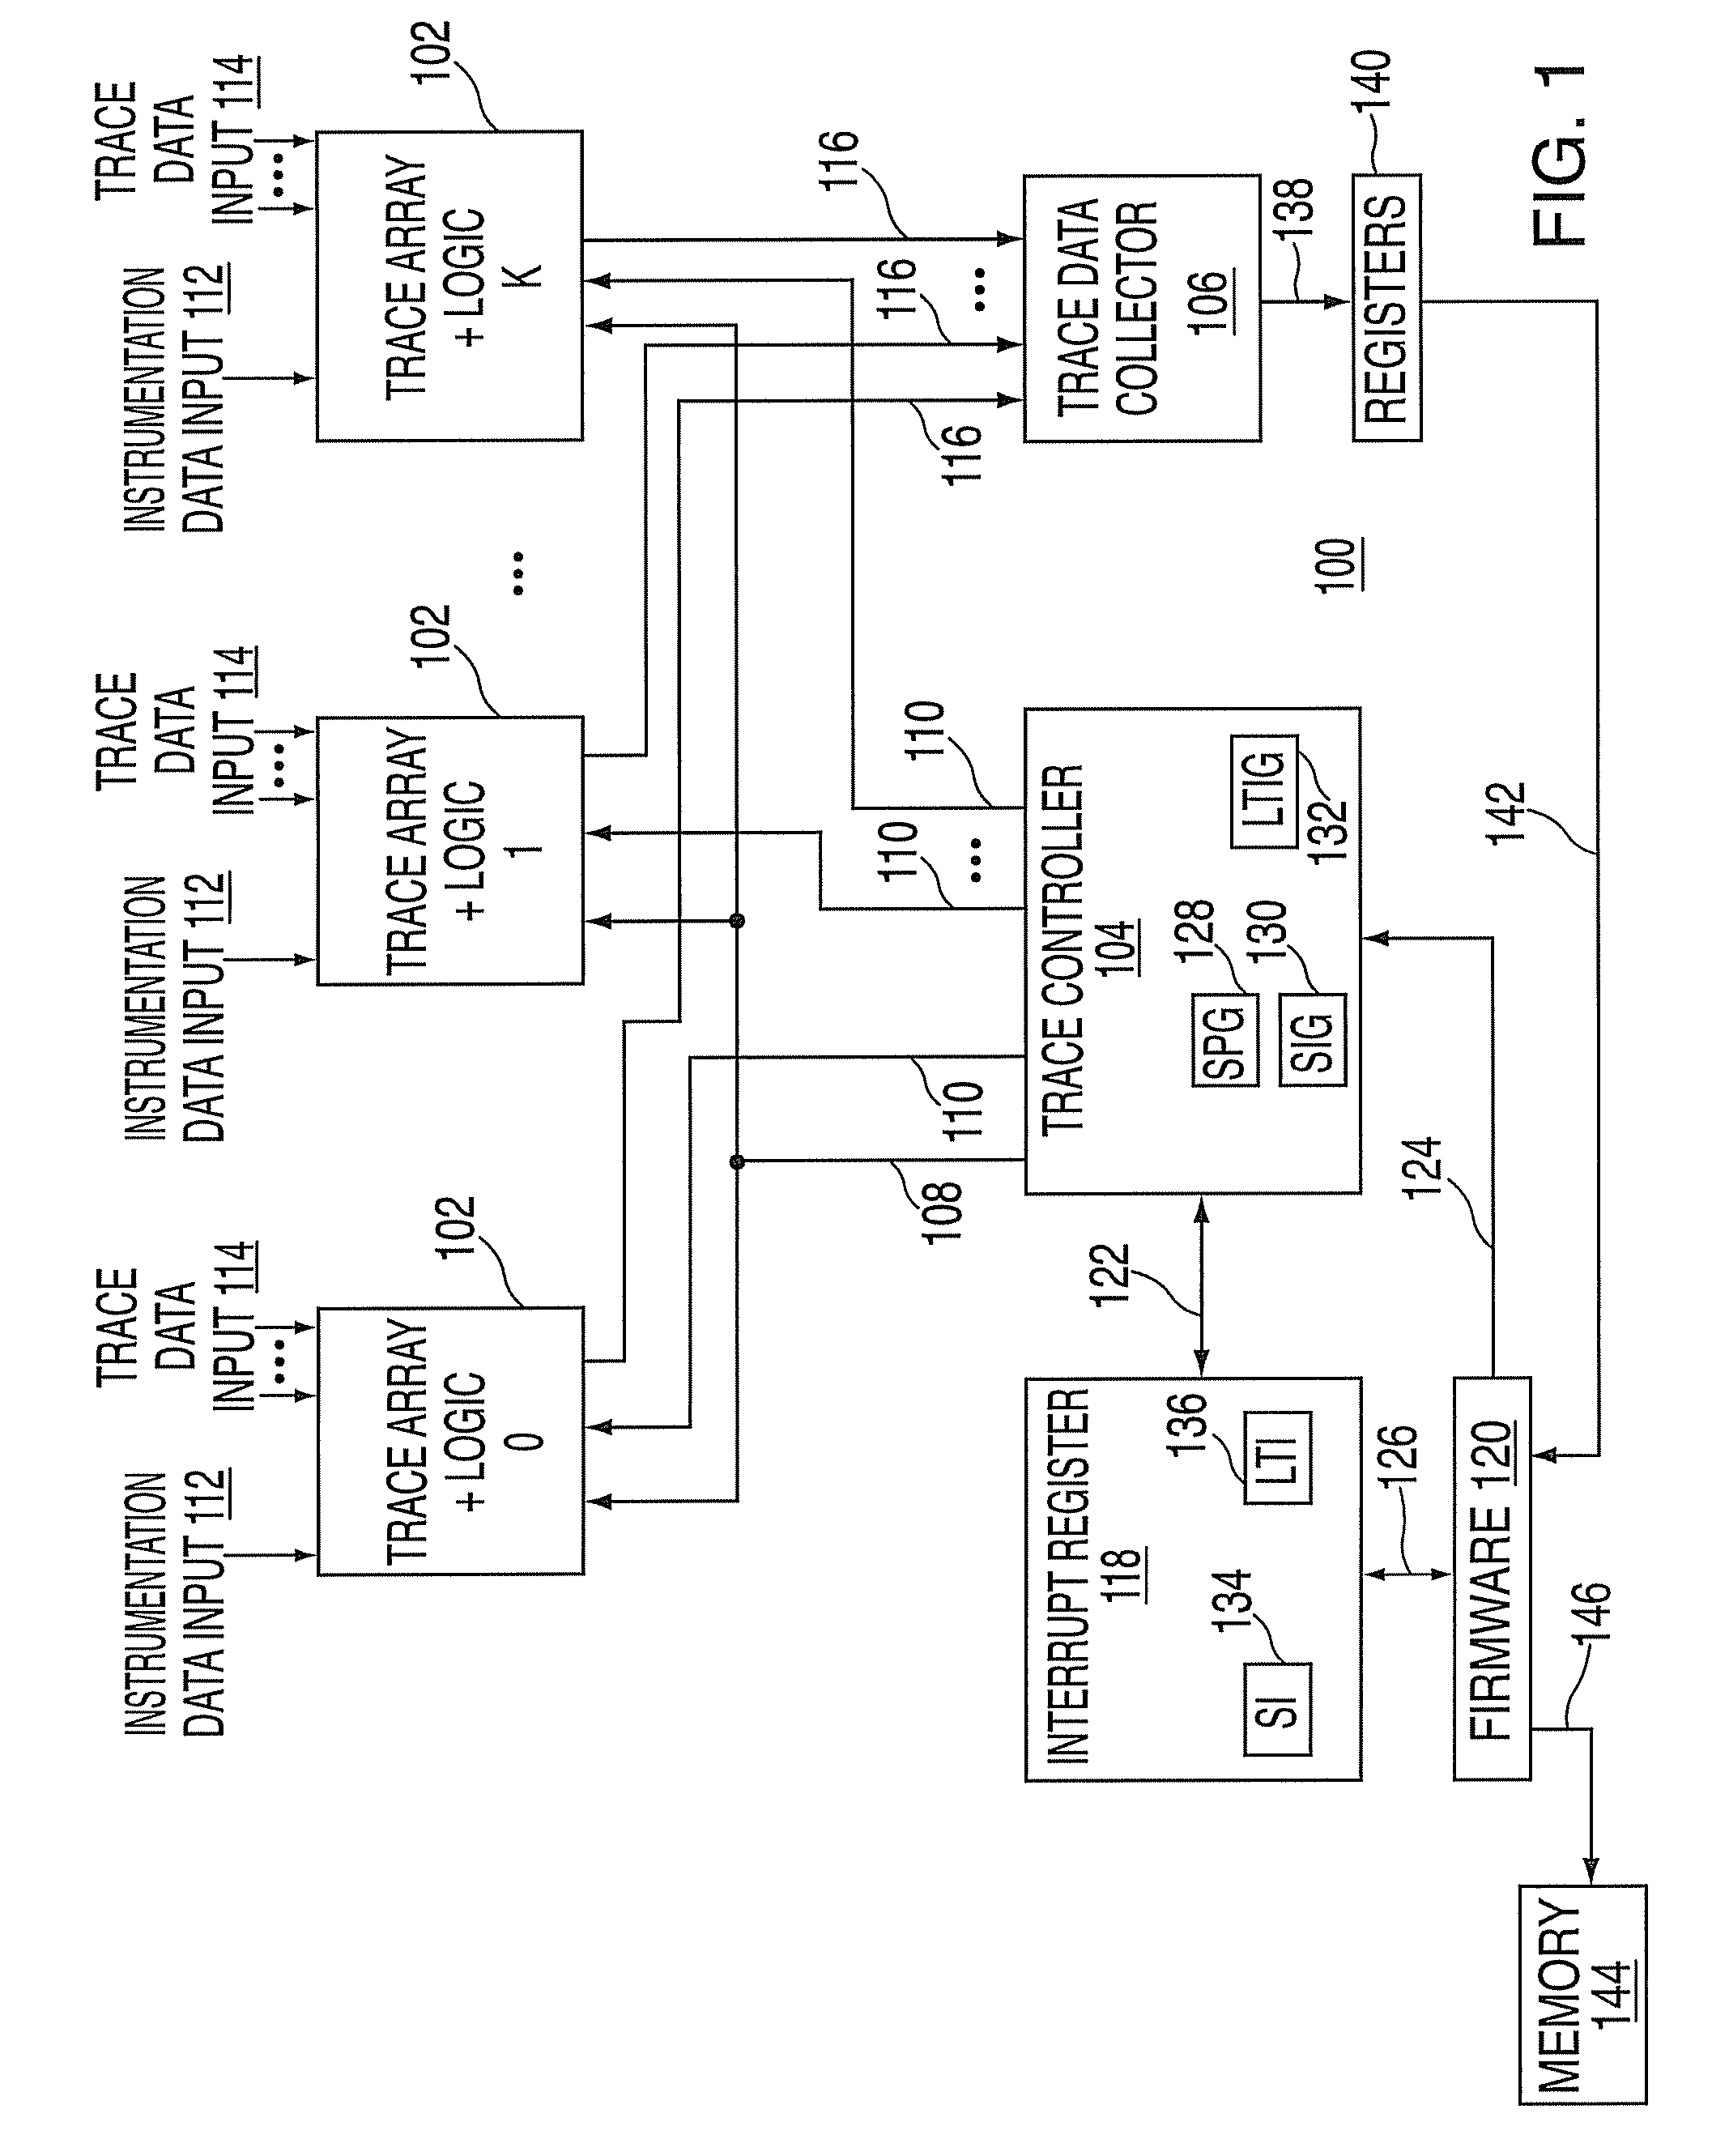 Method, system and computer program product for sampling computer system performance data